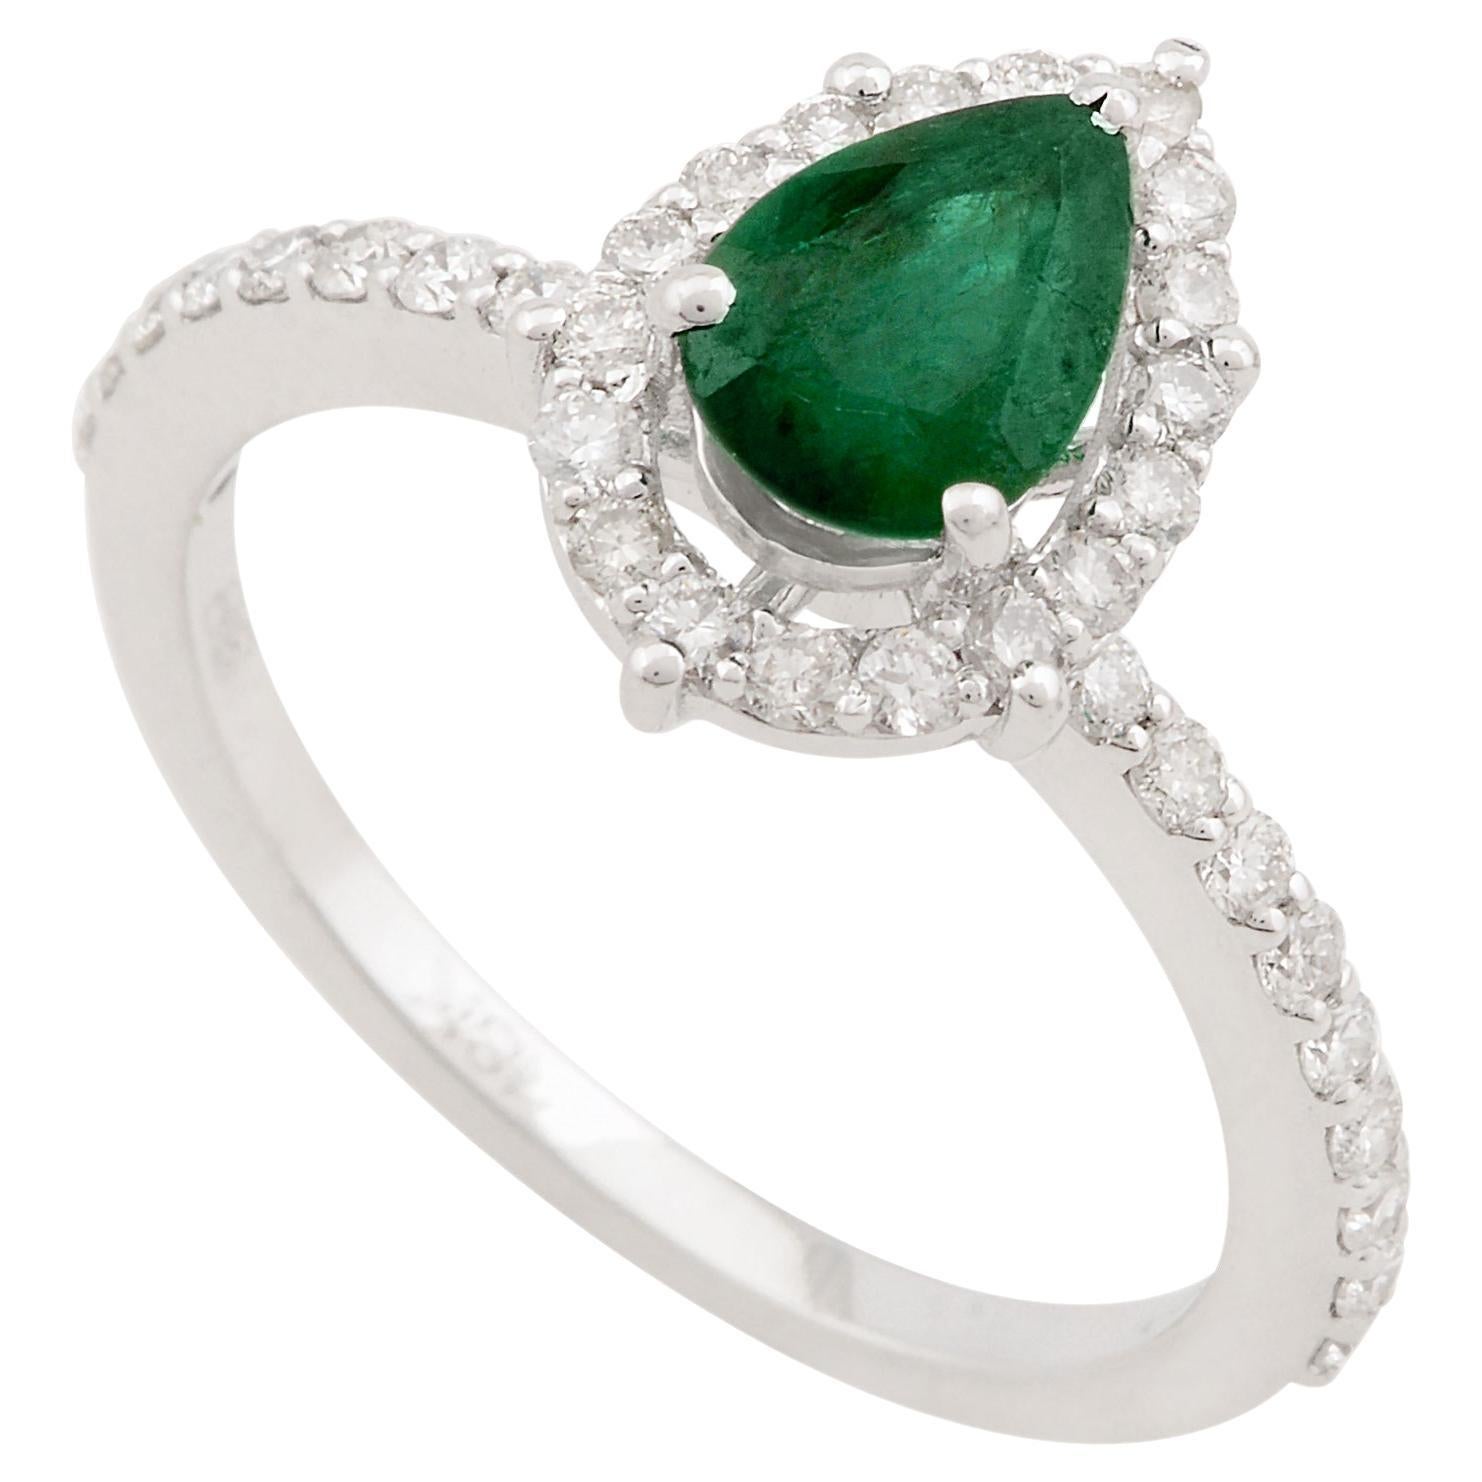 For Sale:  Pear Emerald Gemstone Ring Diamond Pave Solid 18k White Gold Handmade Jewelry